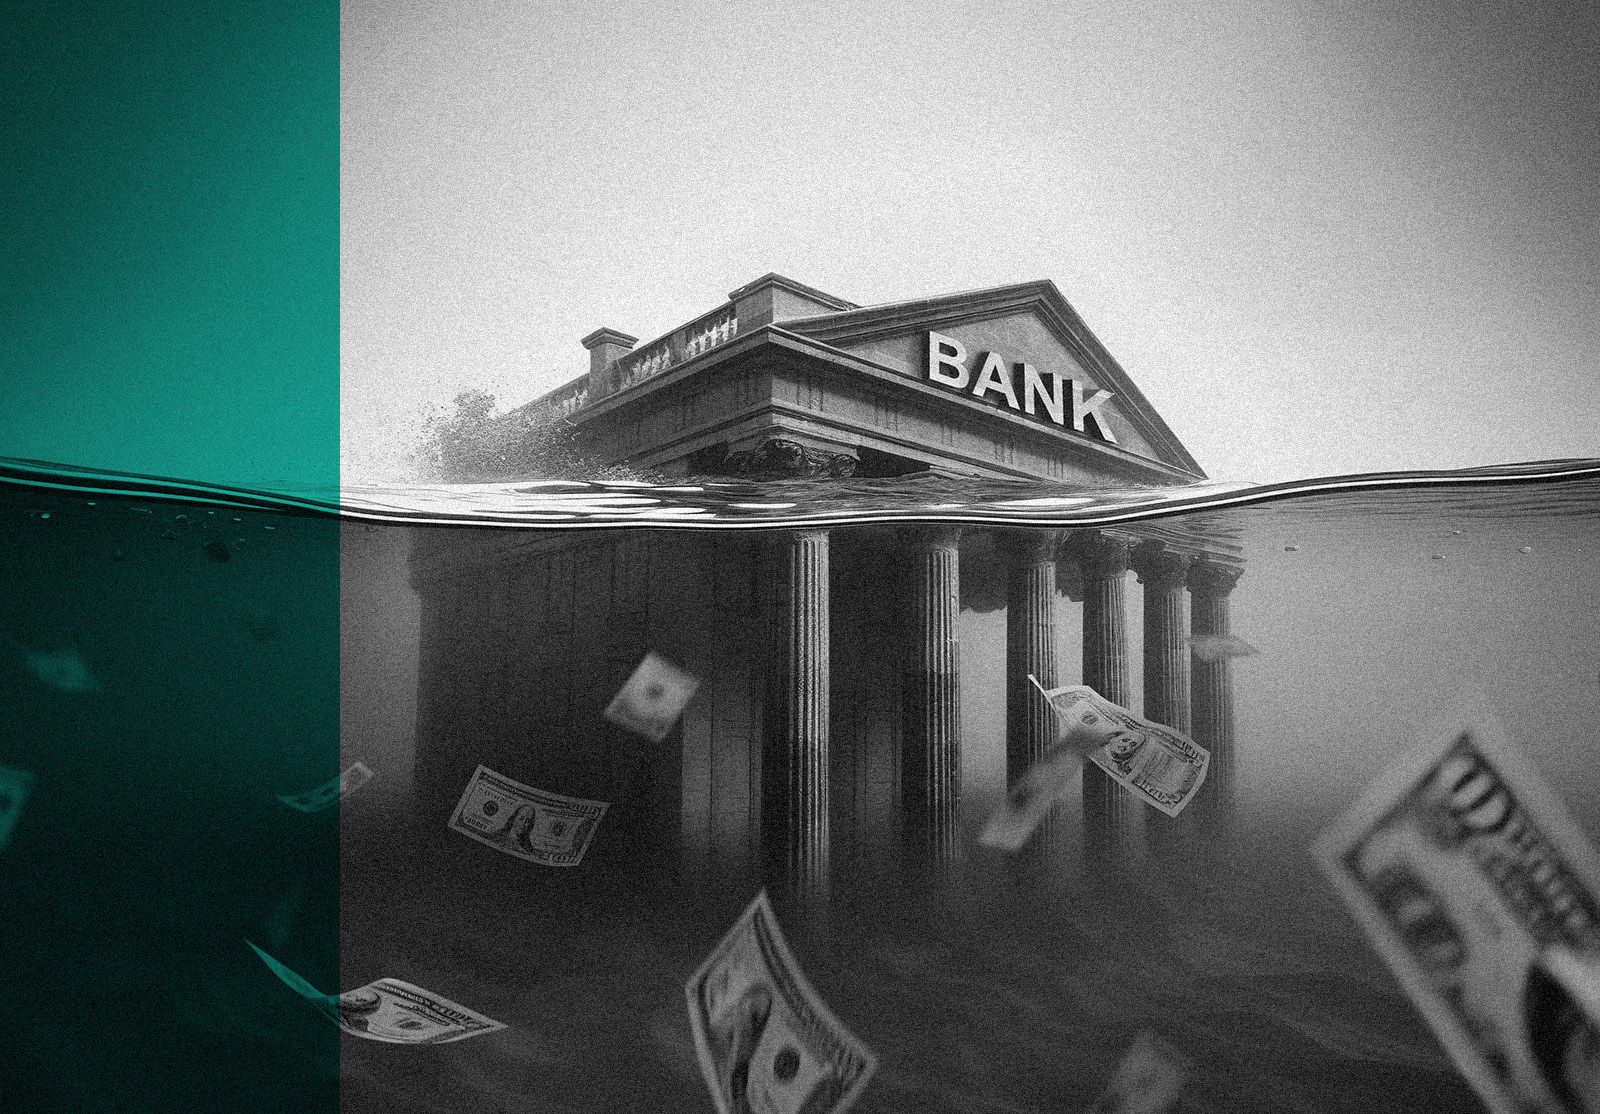 Bank drowning in debt with financial instability